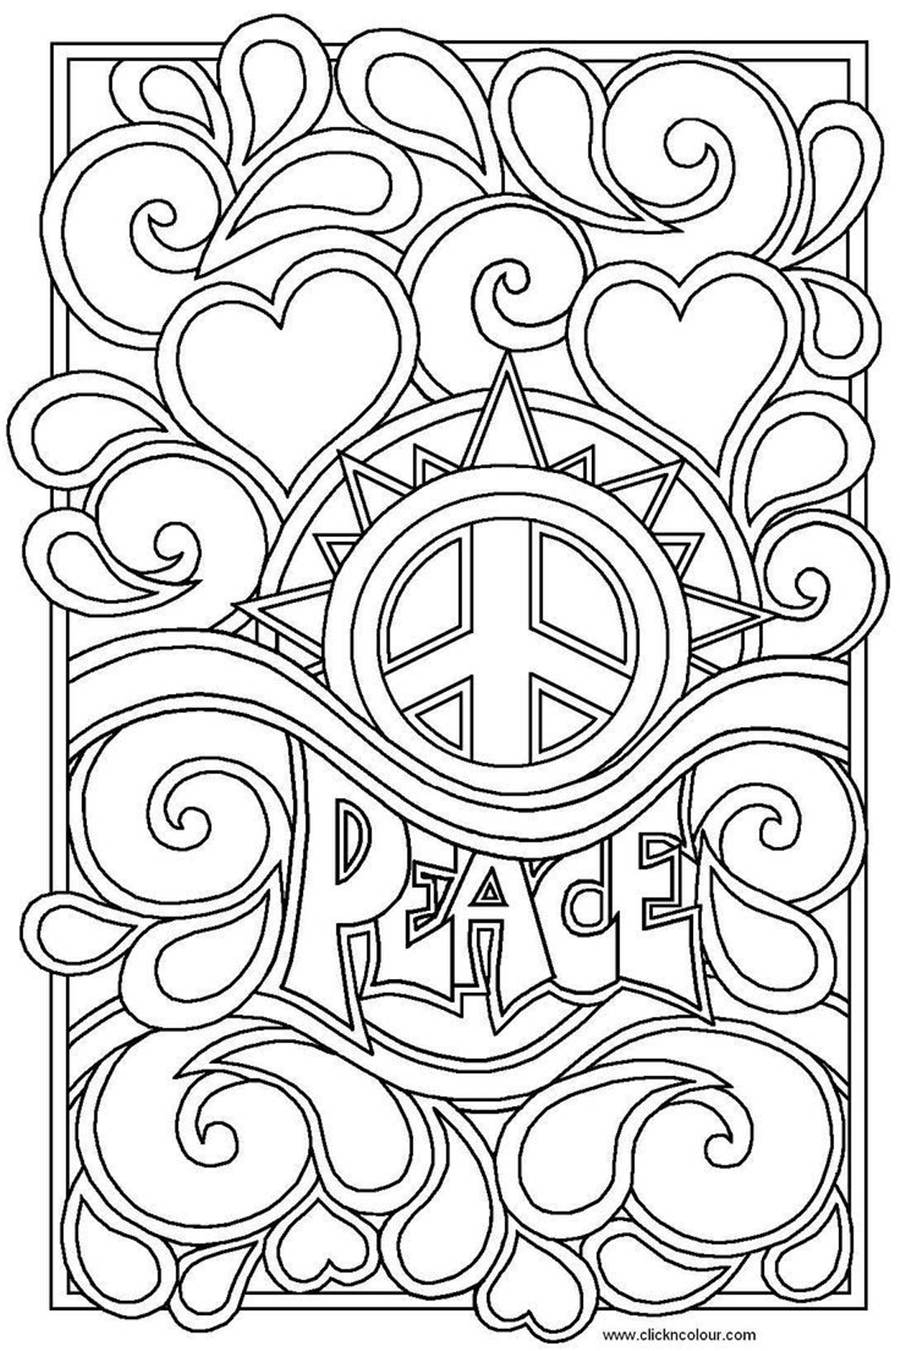 Free Kids Respect Coloring Pages Elegant Easy Drawings - Kid Colorings - Free Printable Coloring Pages On Respect